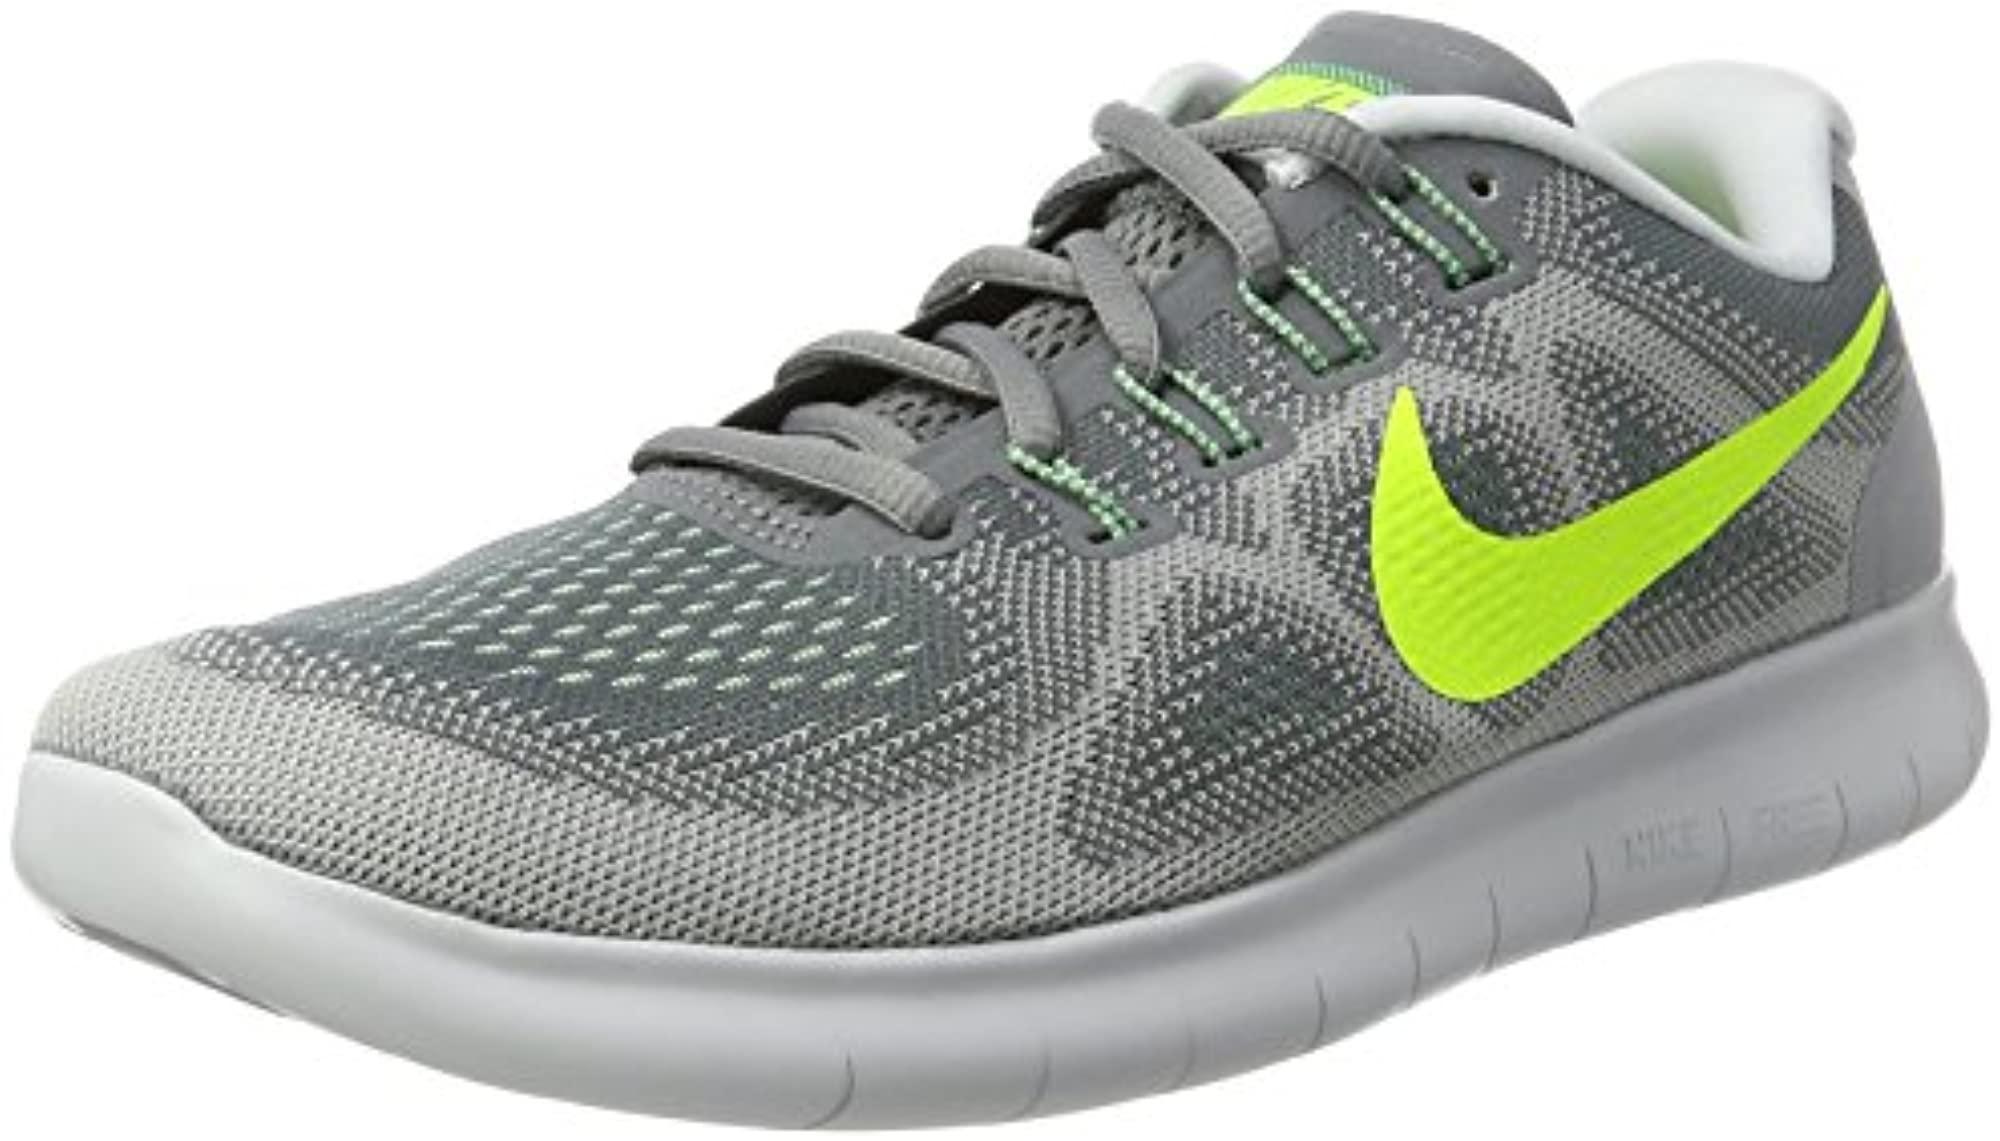 Nike Free Rn 2017 Running Shoes in Grey for Men - Lyst